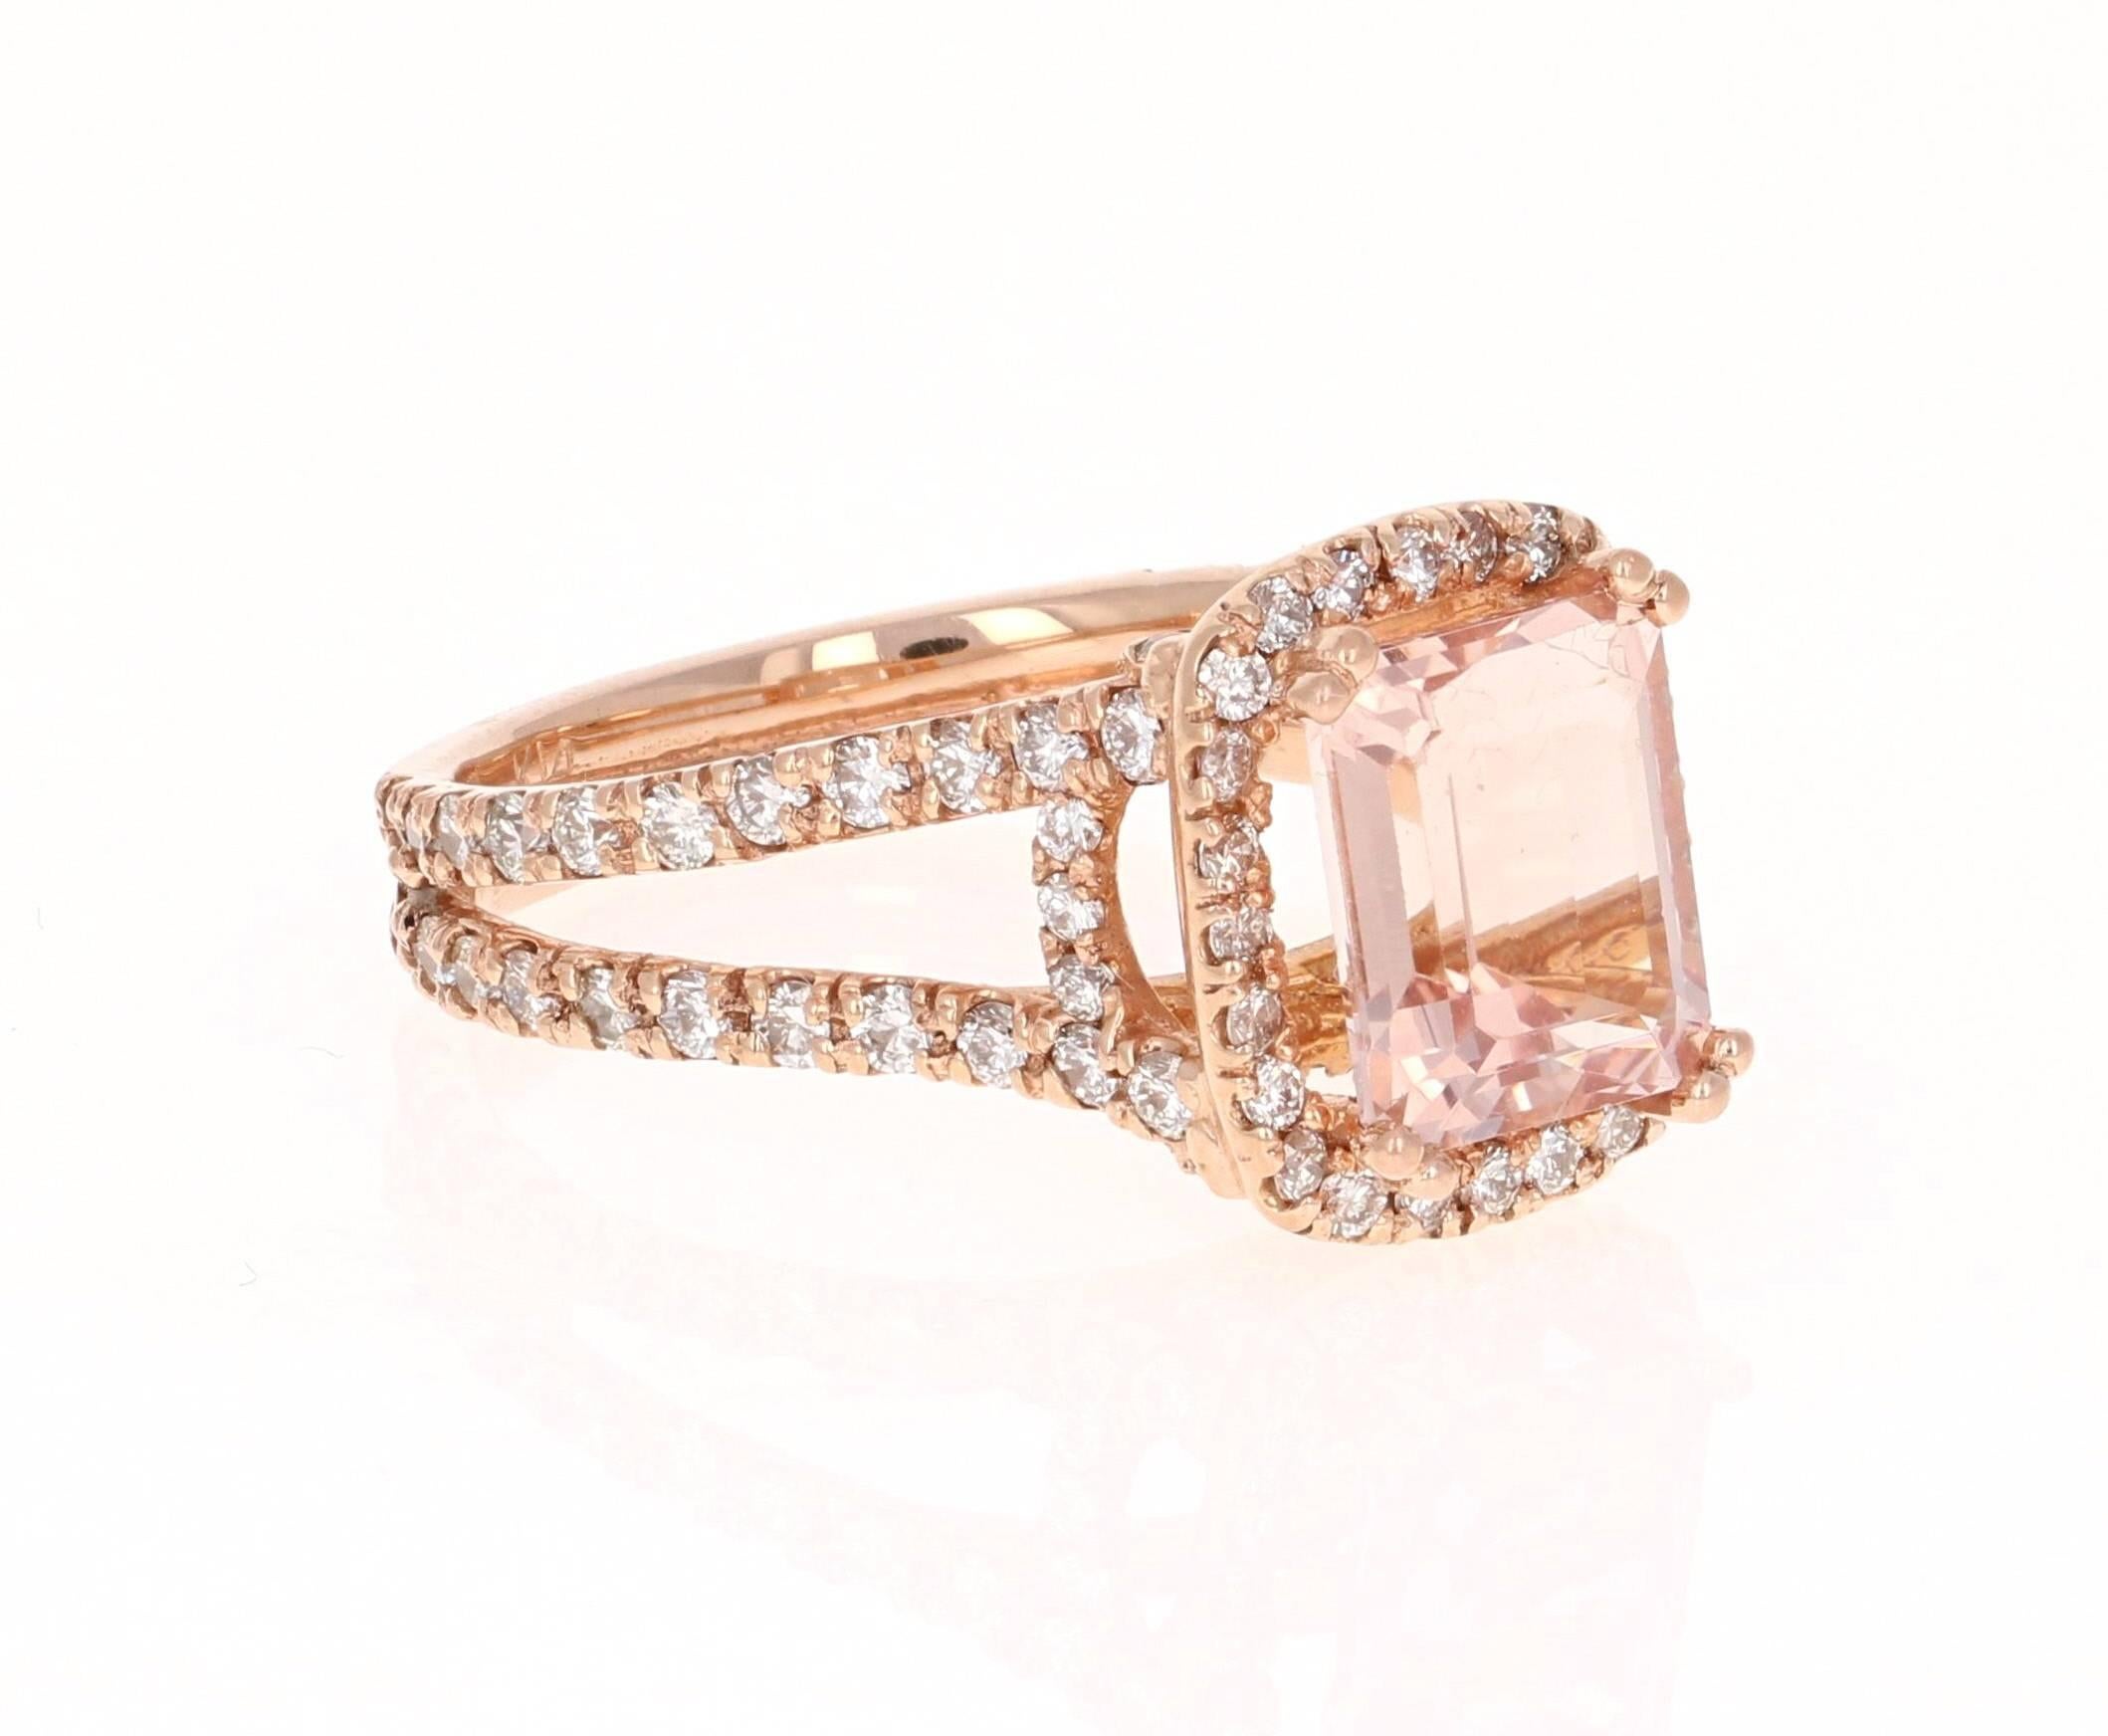 A gorgeous ring that can easily be transformed into an engagement ring for that special someone!  It has a stunning 2.68 carat Emerald cut Morganite set in the center of the ring and has a halo of 92 Round Cut Diamonds that weigh 1.26 carats.  The